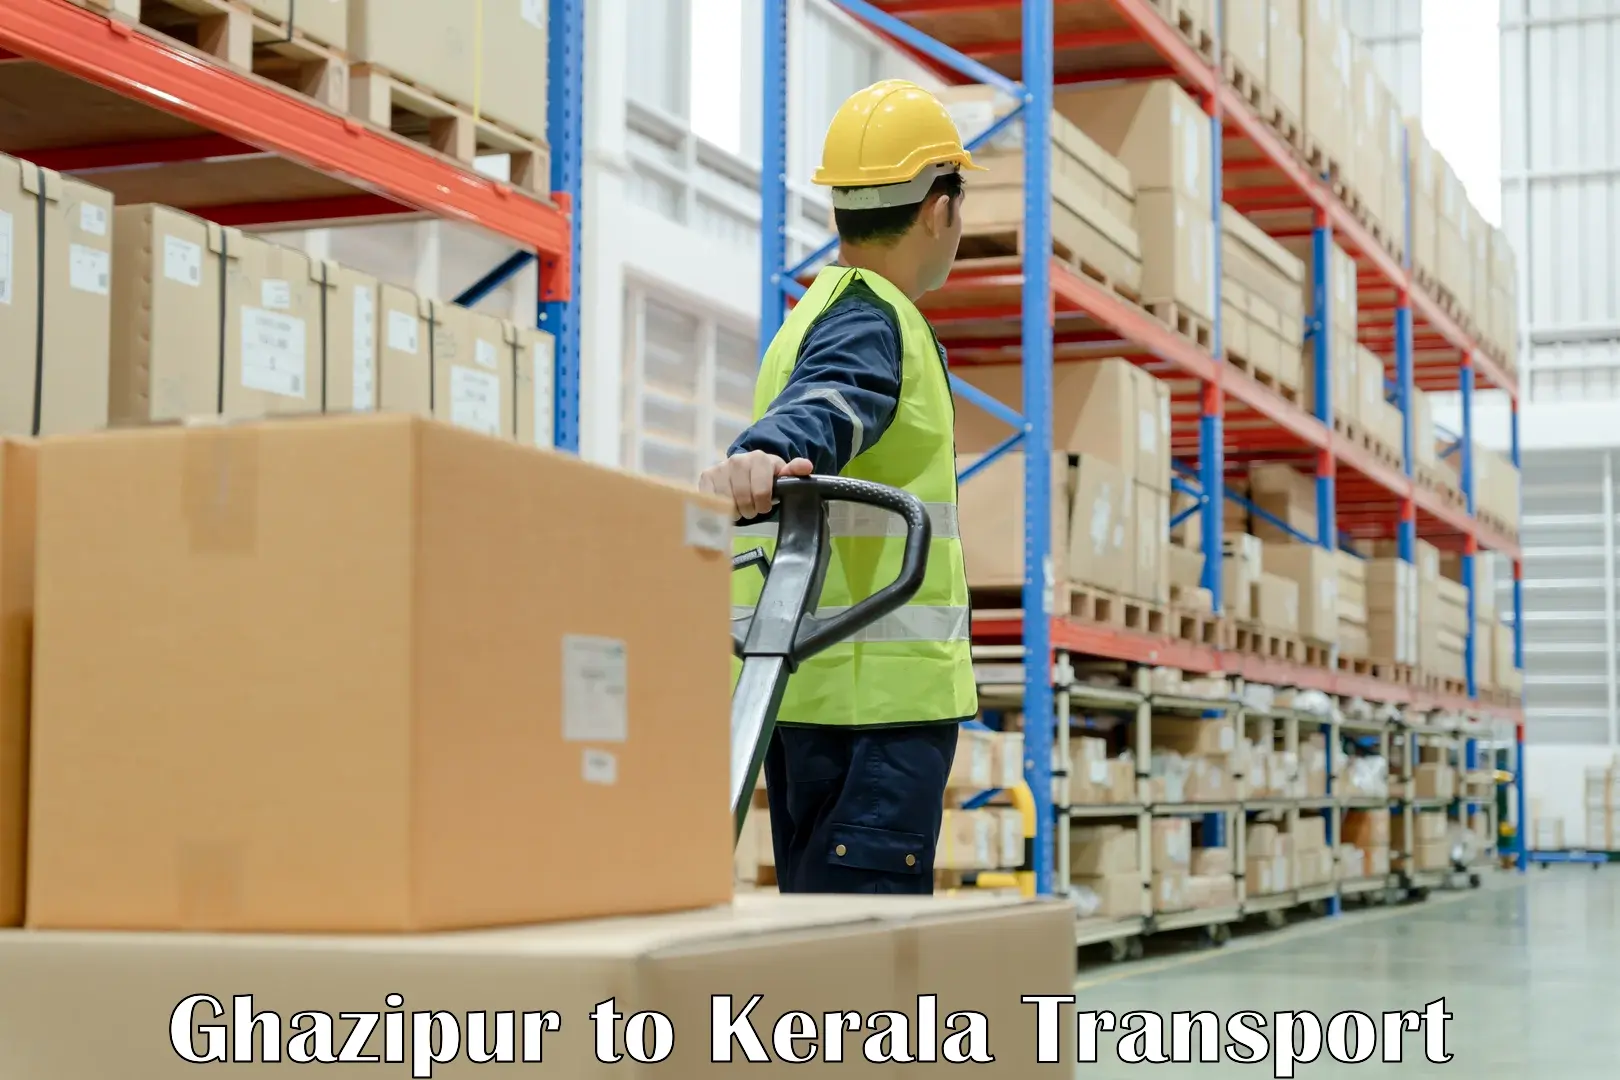 Nearby transport service Ghazipur to Kerala